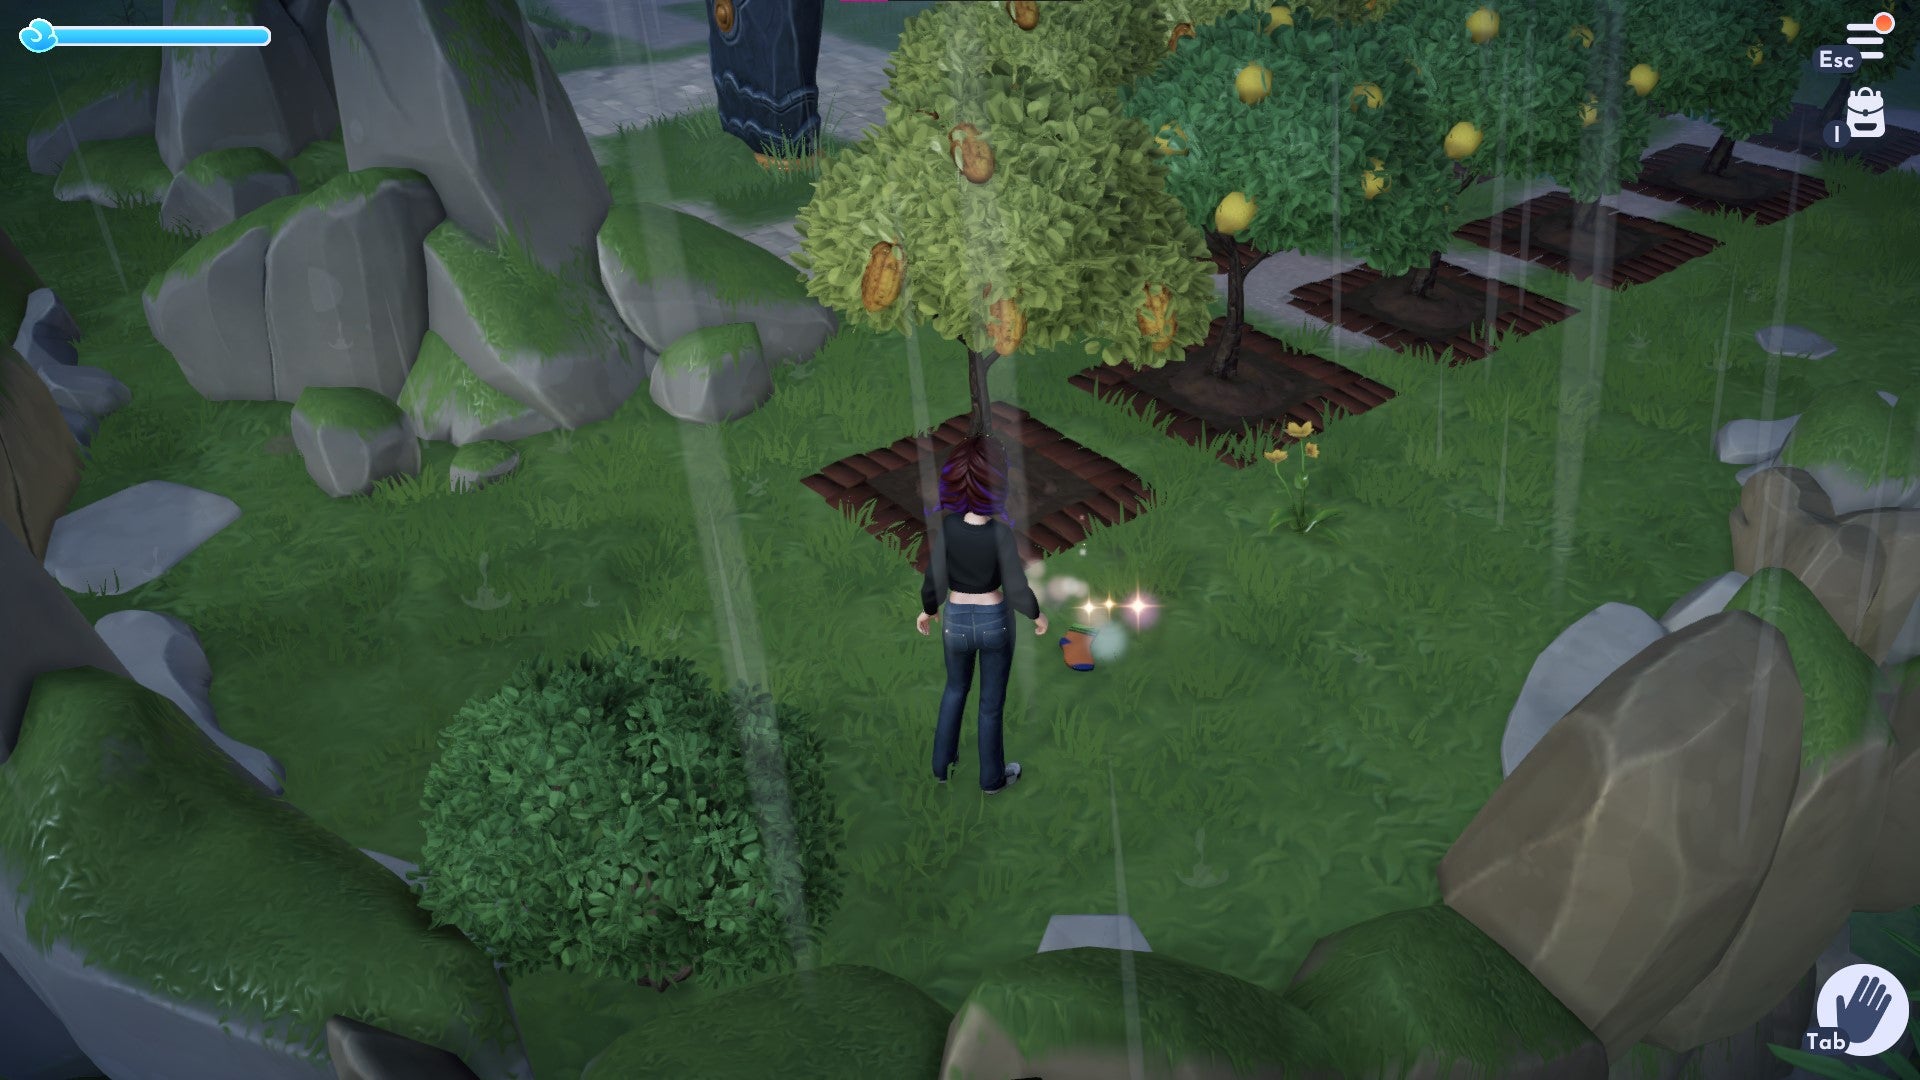 The player looks at a chewed-up sock on the floor of Peaceful Meadow in Disney Dreamlight Valley